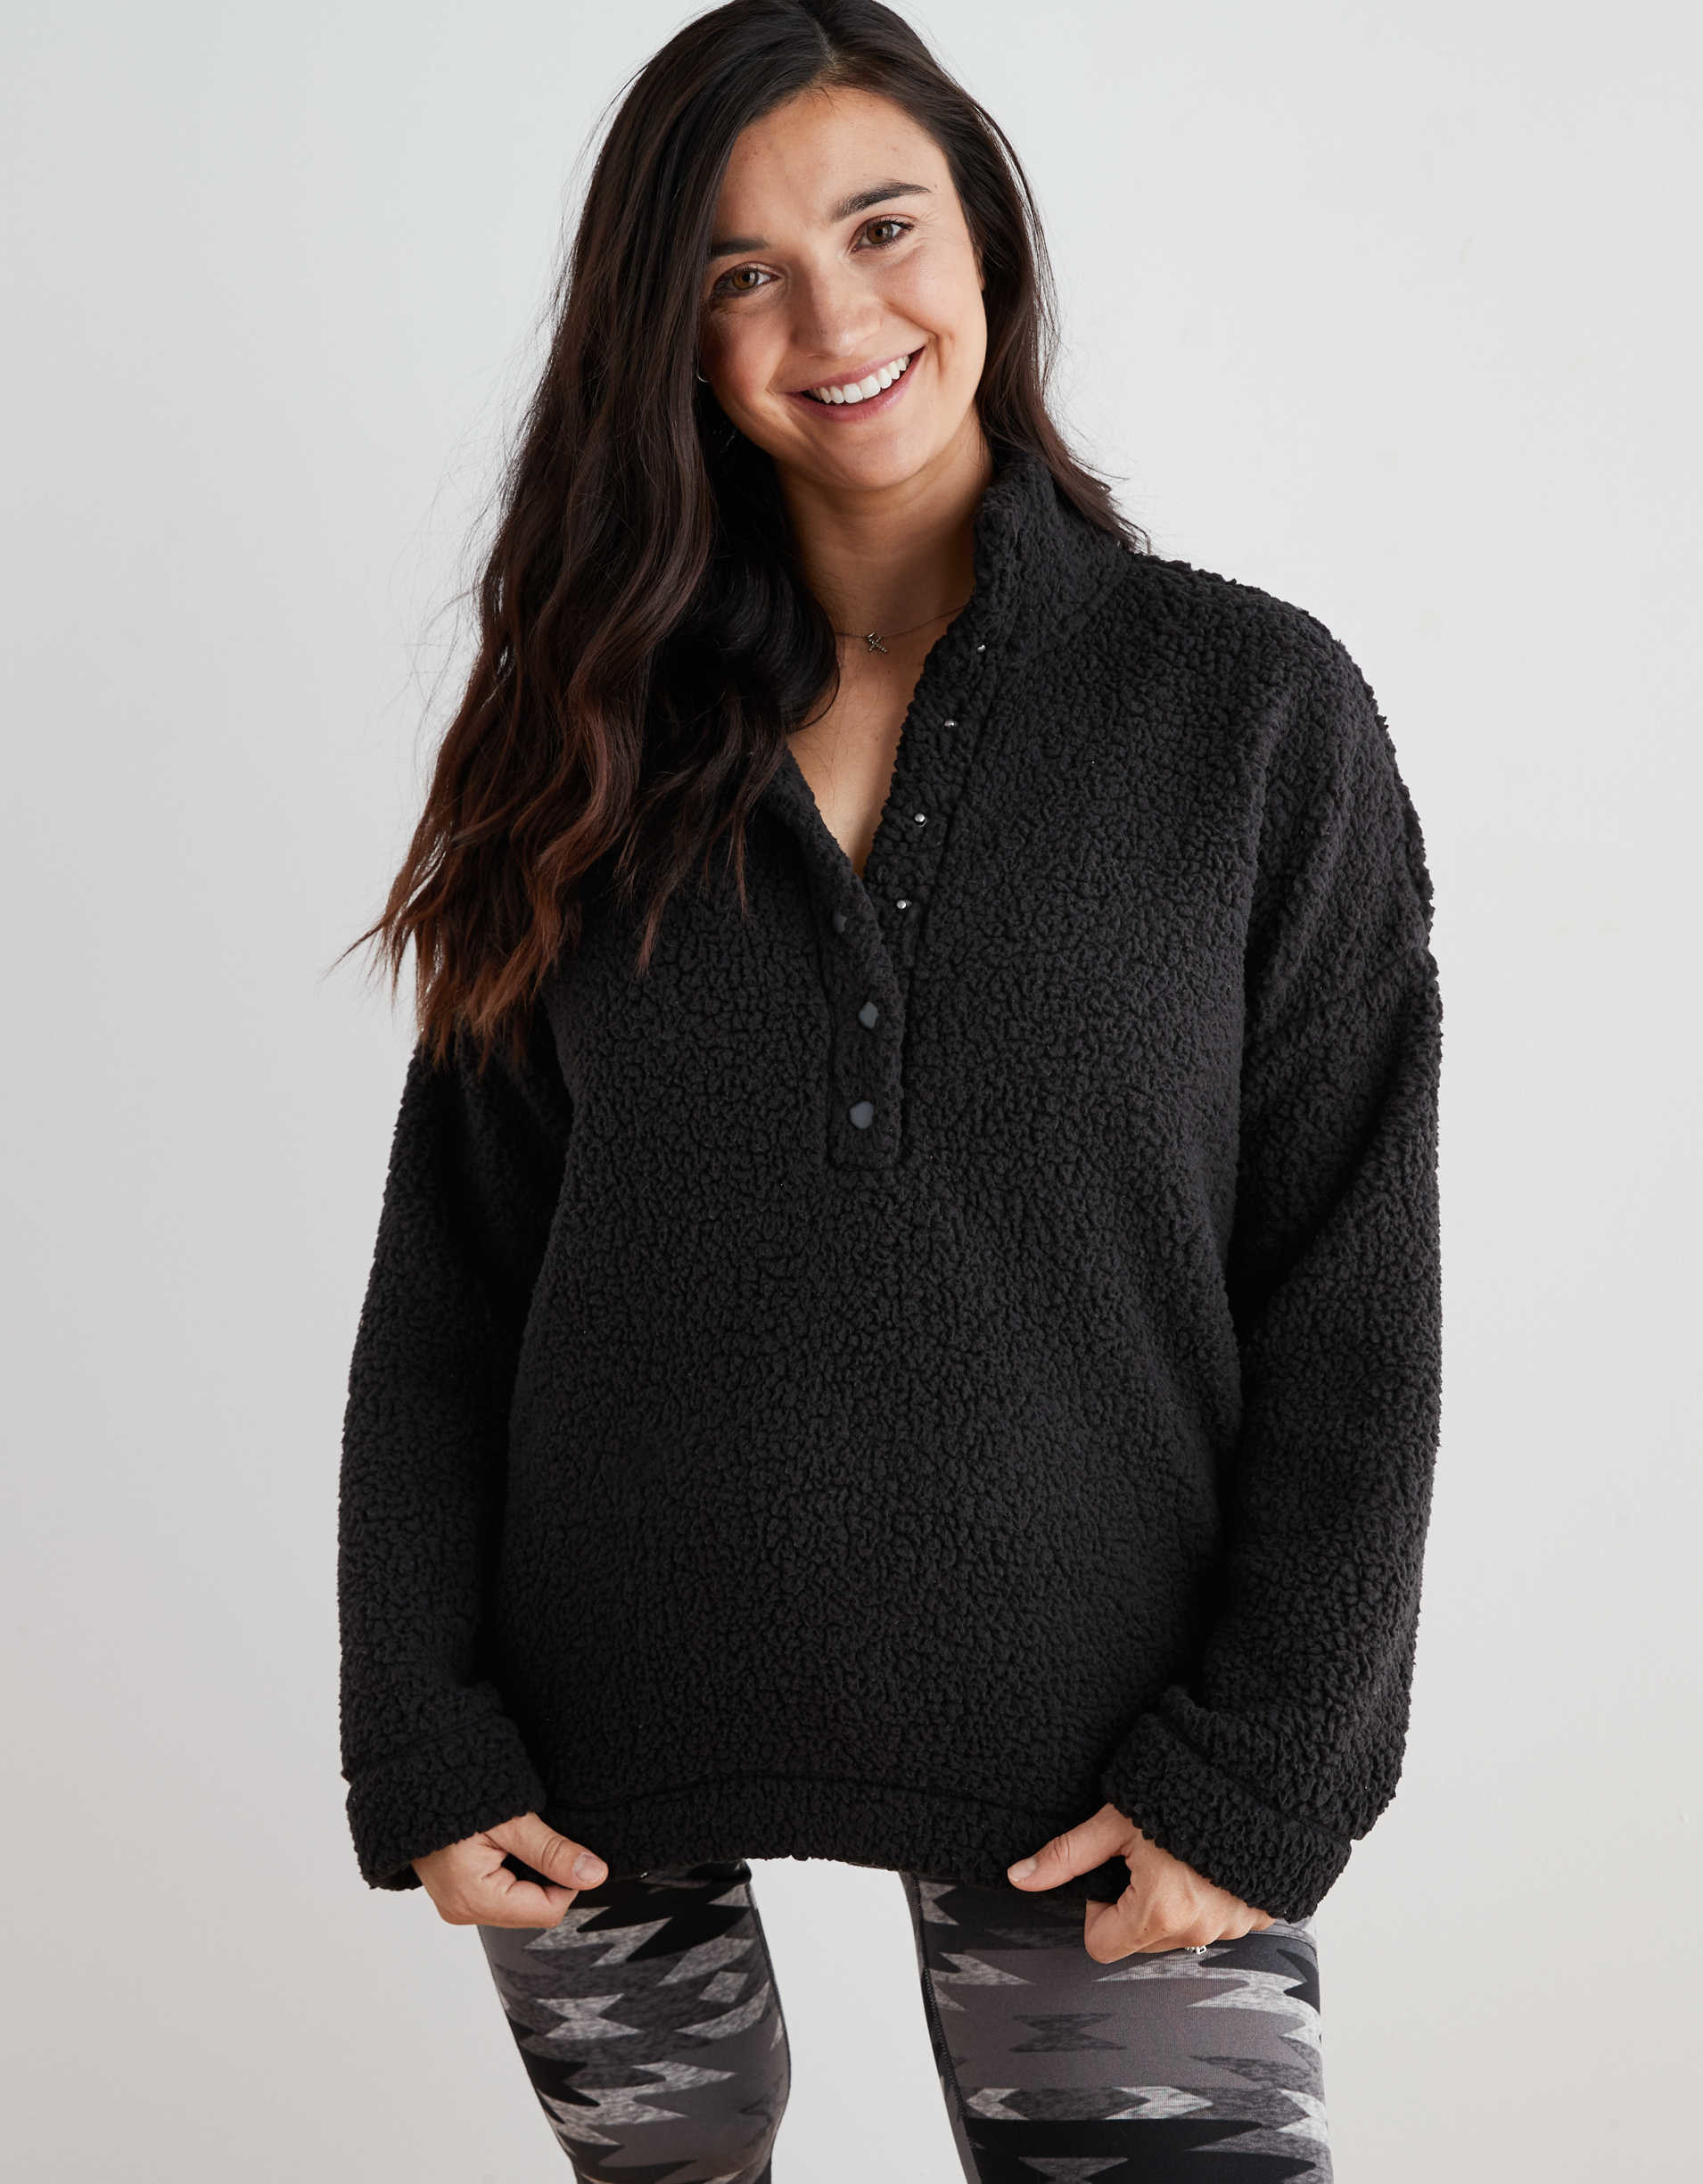 Model wearing the fuzzy sweatshirt in black with snaps a quarter of the way down the middle